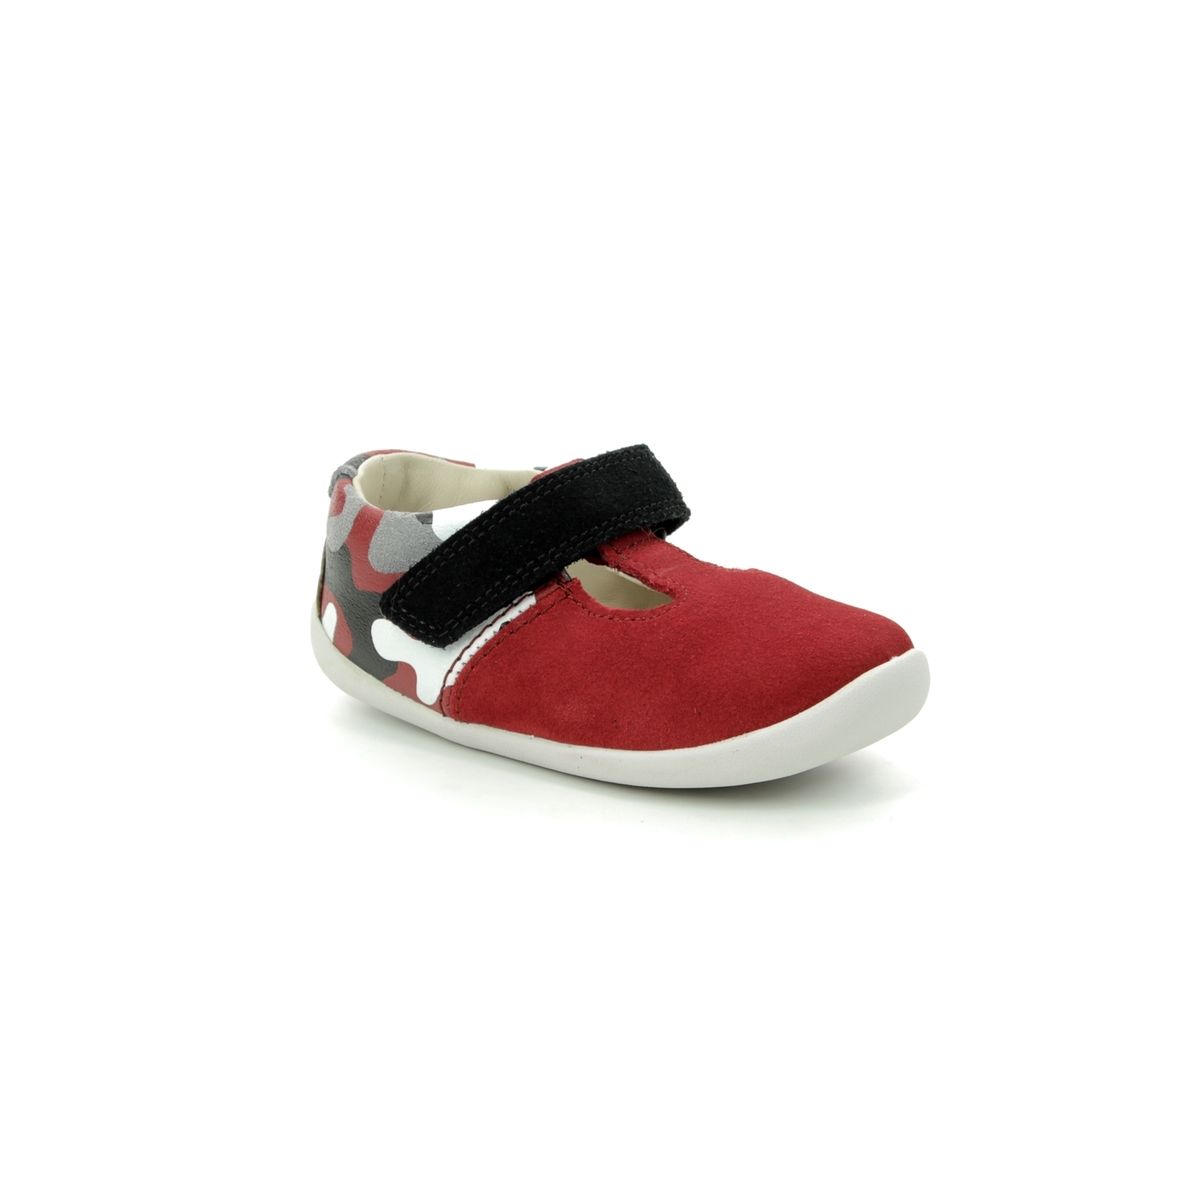 Clarks Roamer Go G Fit Red first shoes